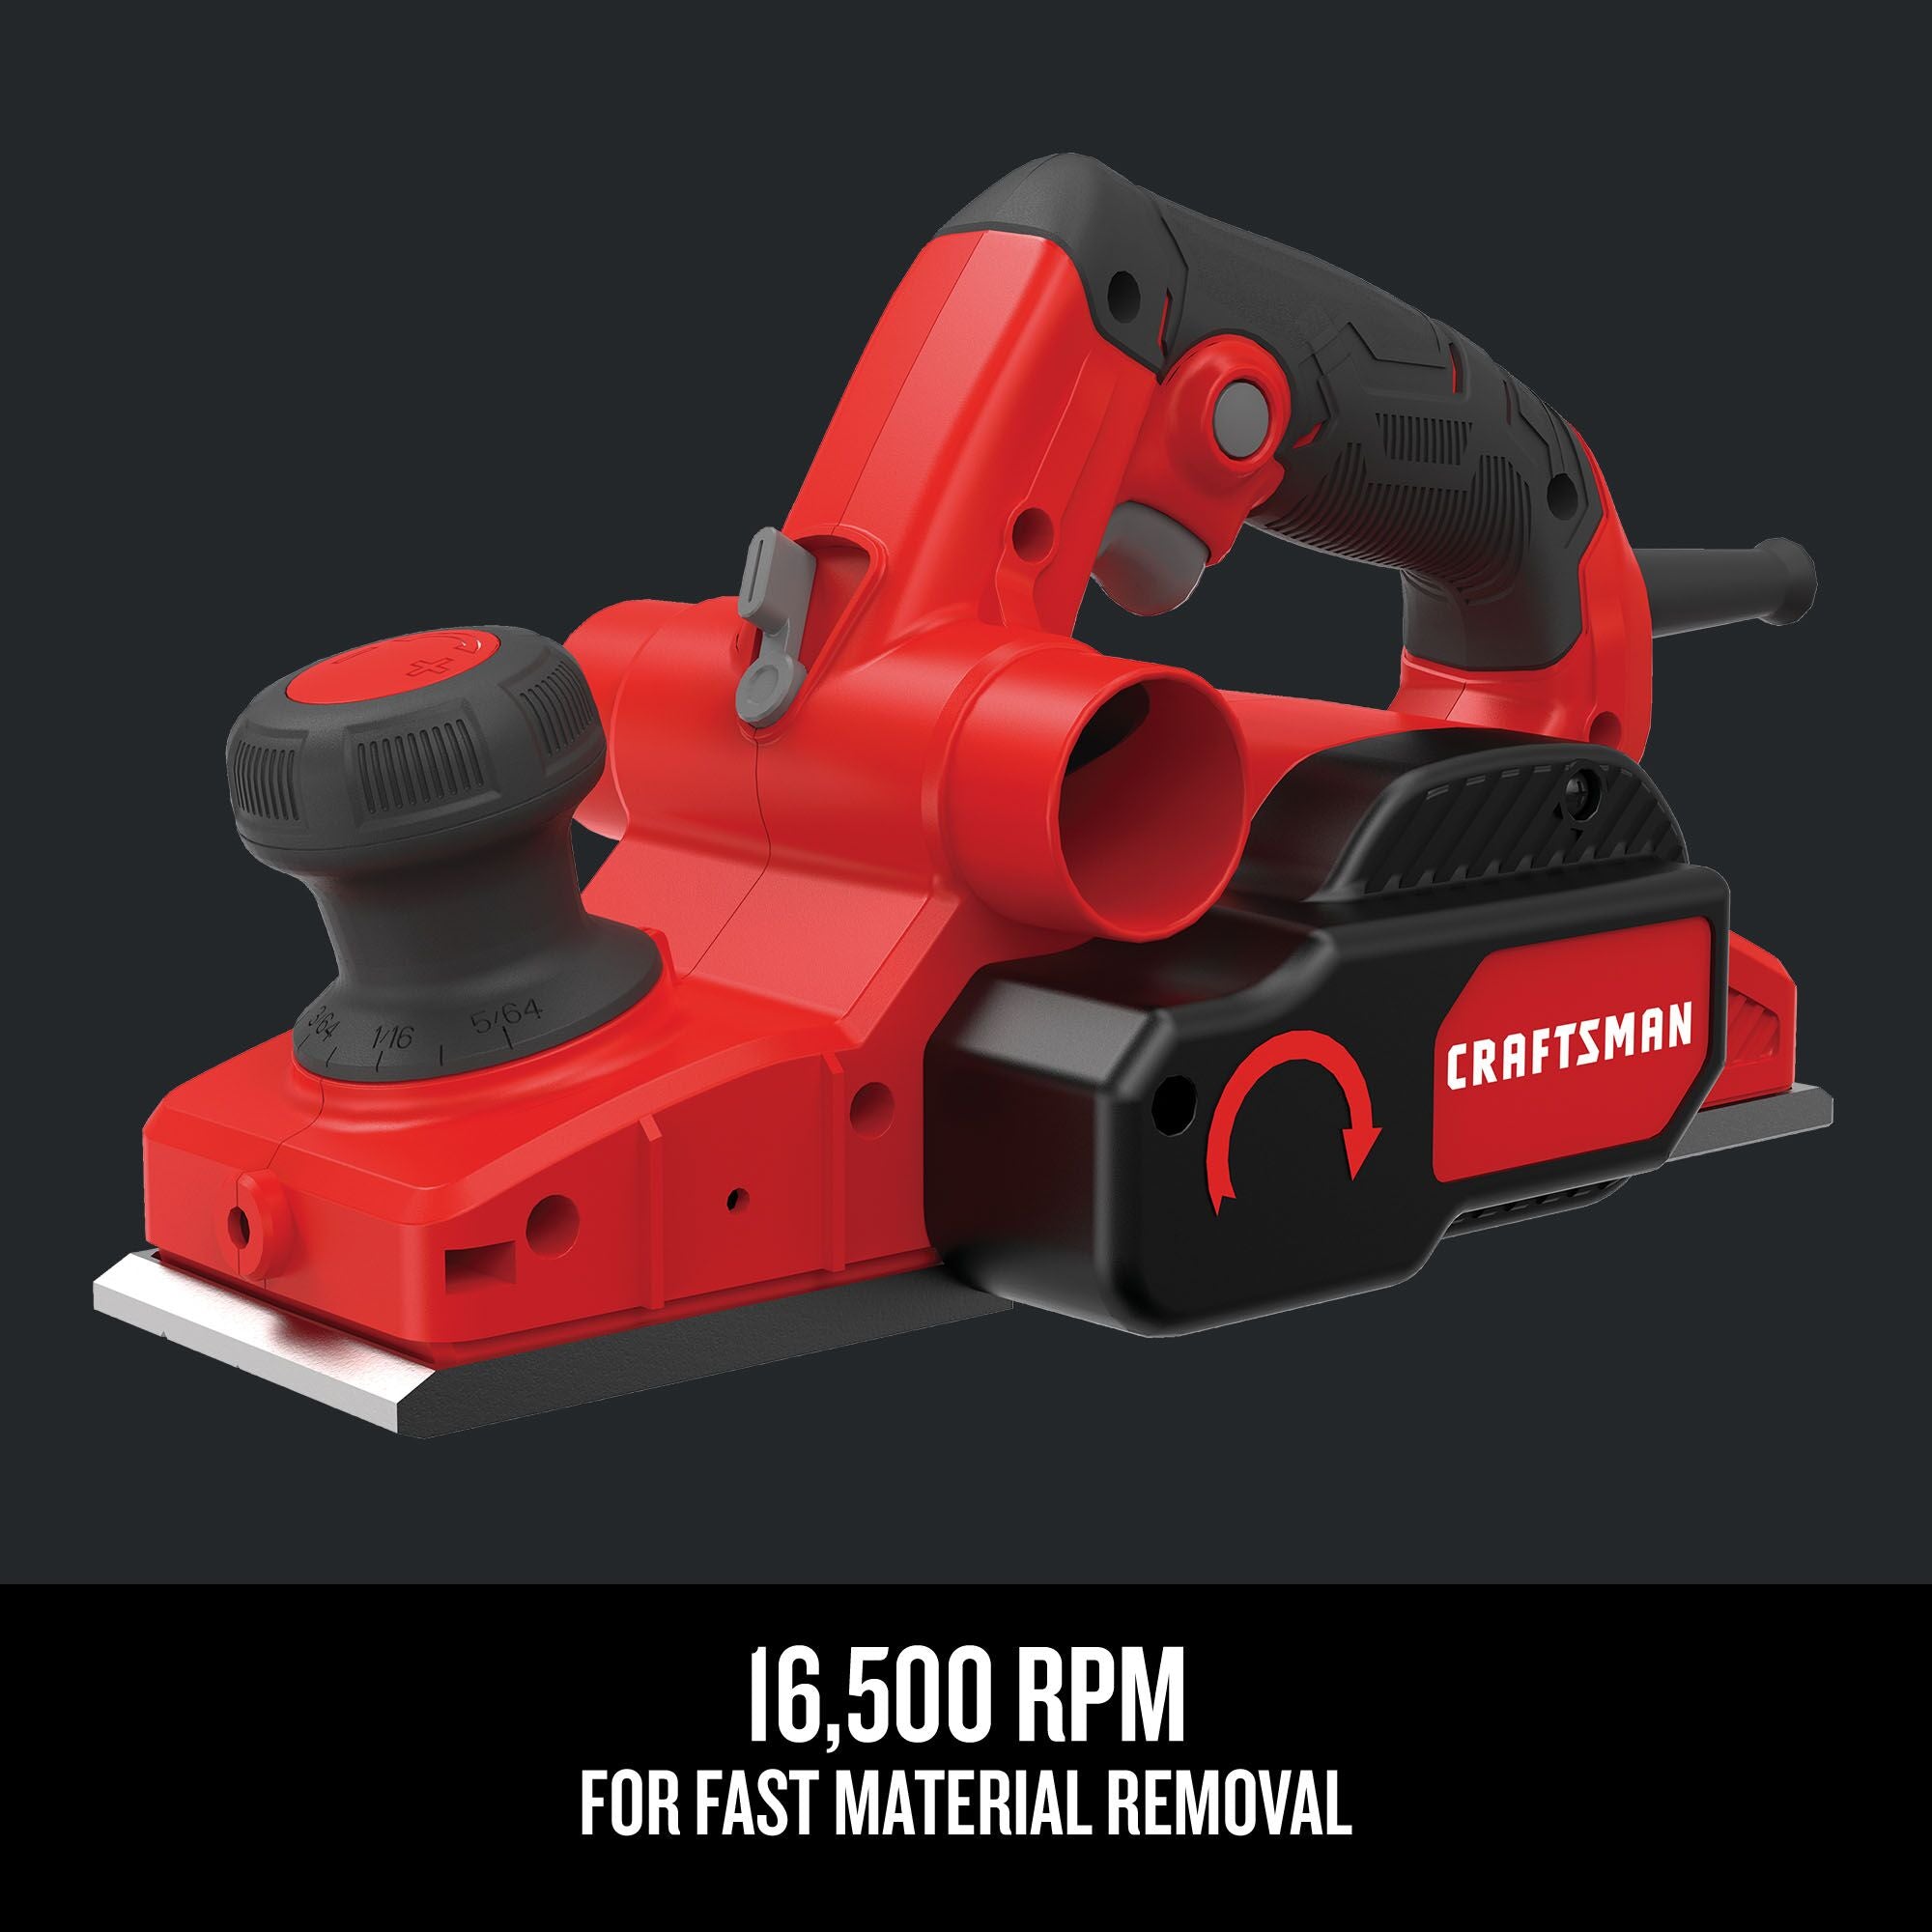 Graphic of CRAFTSMAN Blades: Planer & Jointer highlighting product features